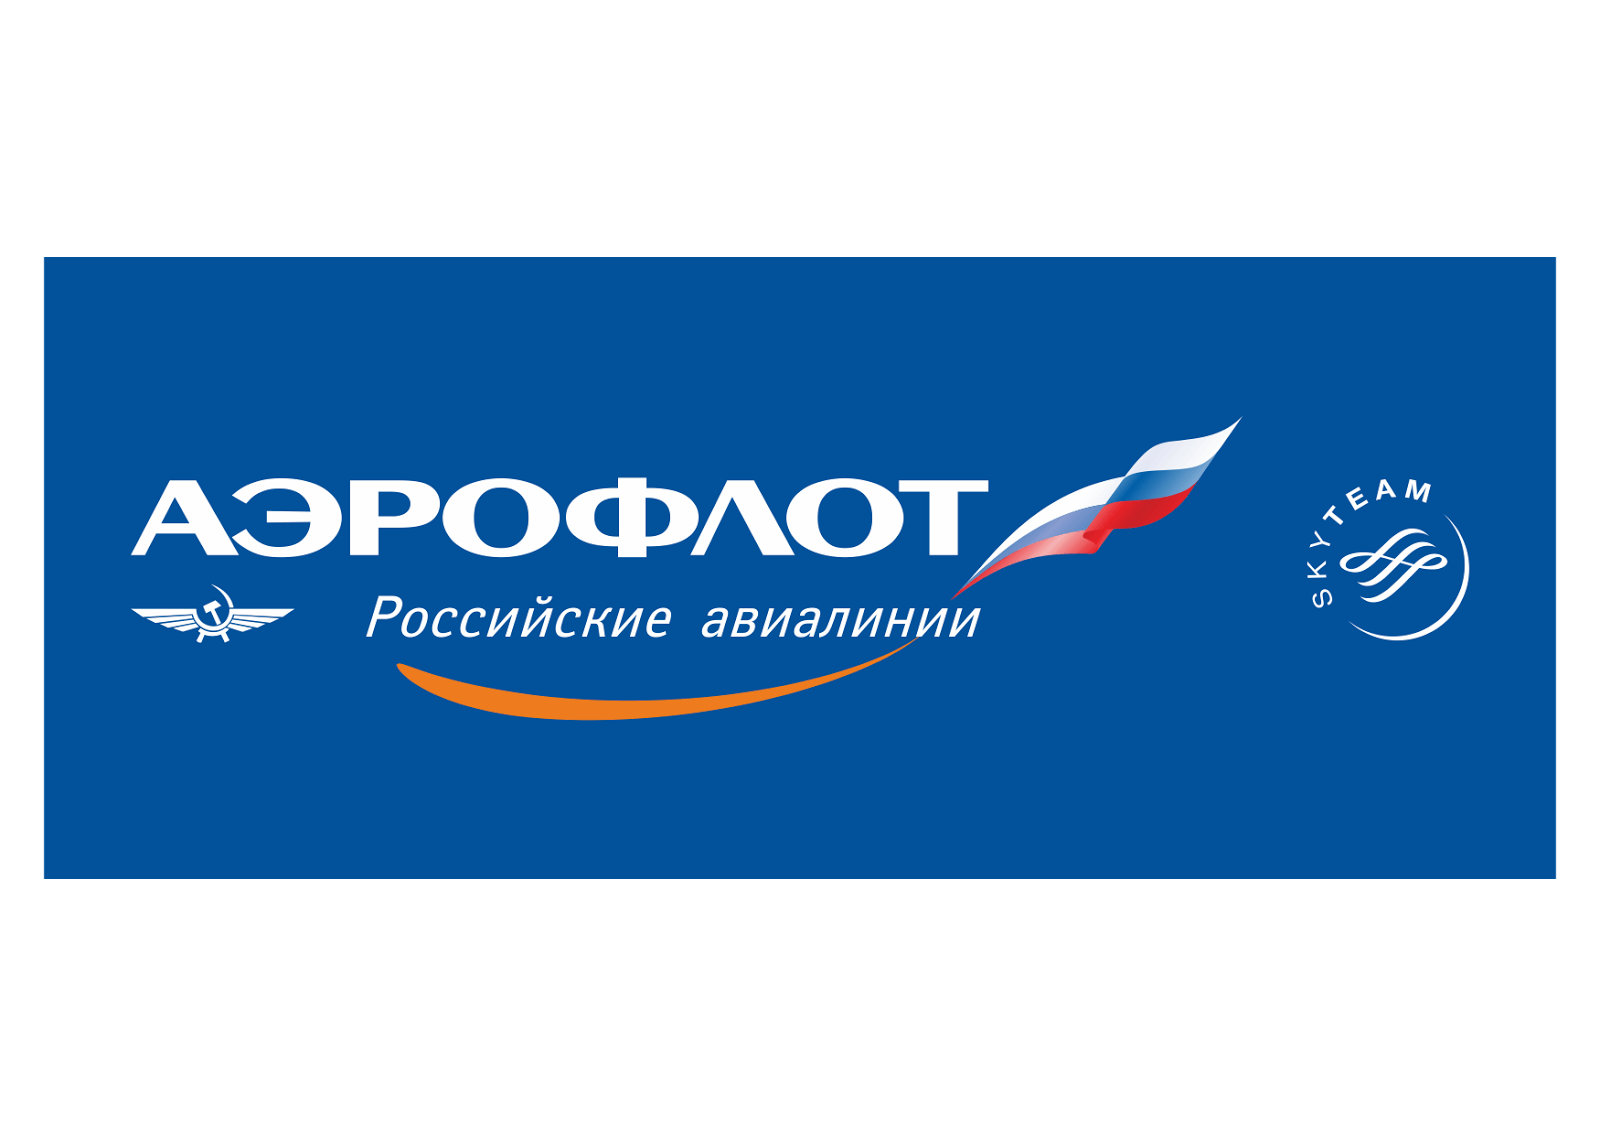 Russia Airline Logo - Aeroflot Russian Airlines Logo Vector Format Cdr Ai Eps Logo Image